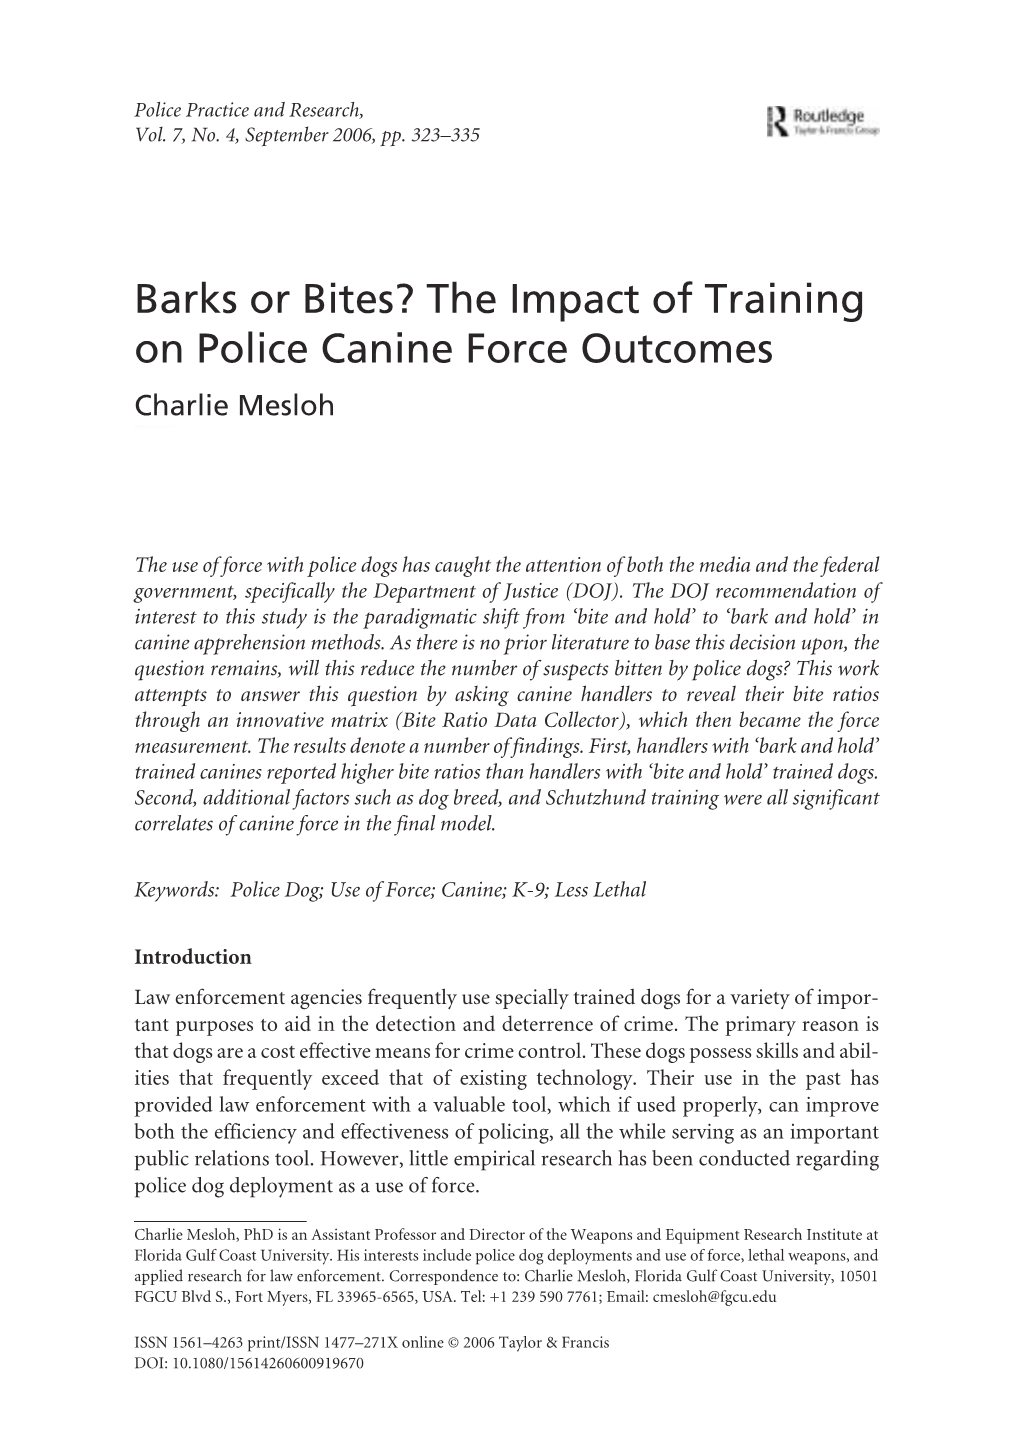 Barks Or Bites? the Impact of Training on Police Canine Force Outcomes